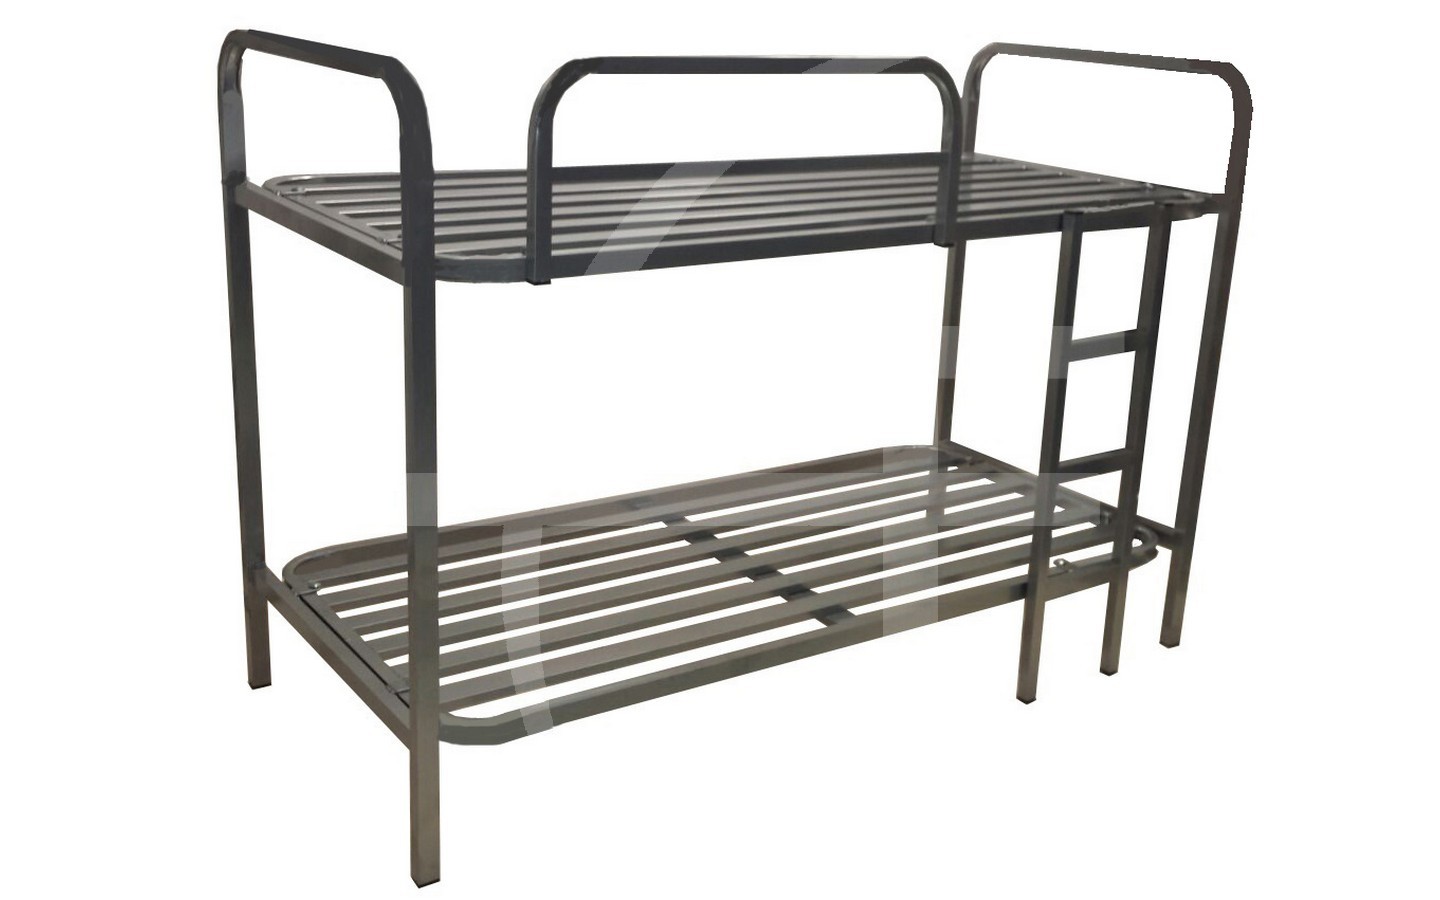 Bunk Beds For S Steel, Bunk Beds Metal And Wood